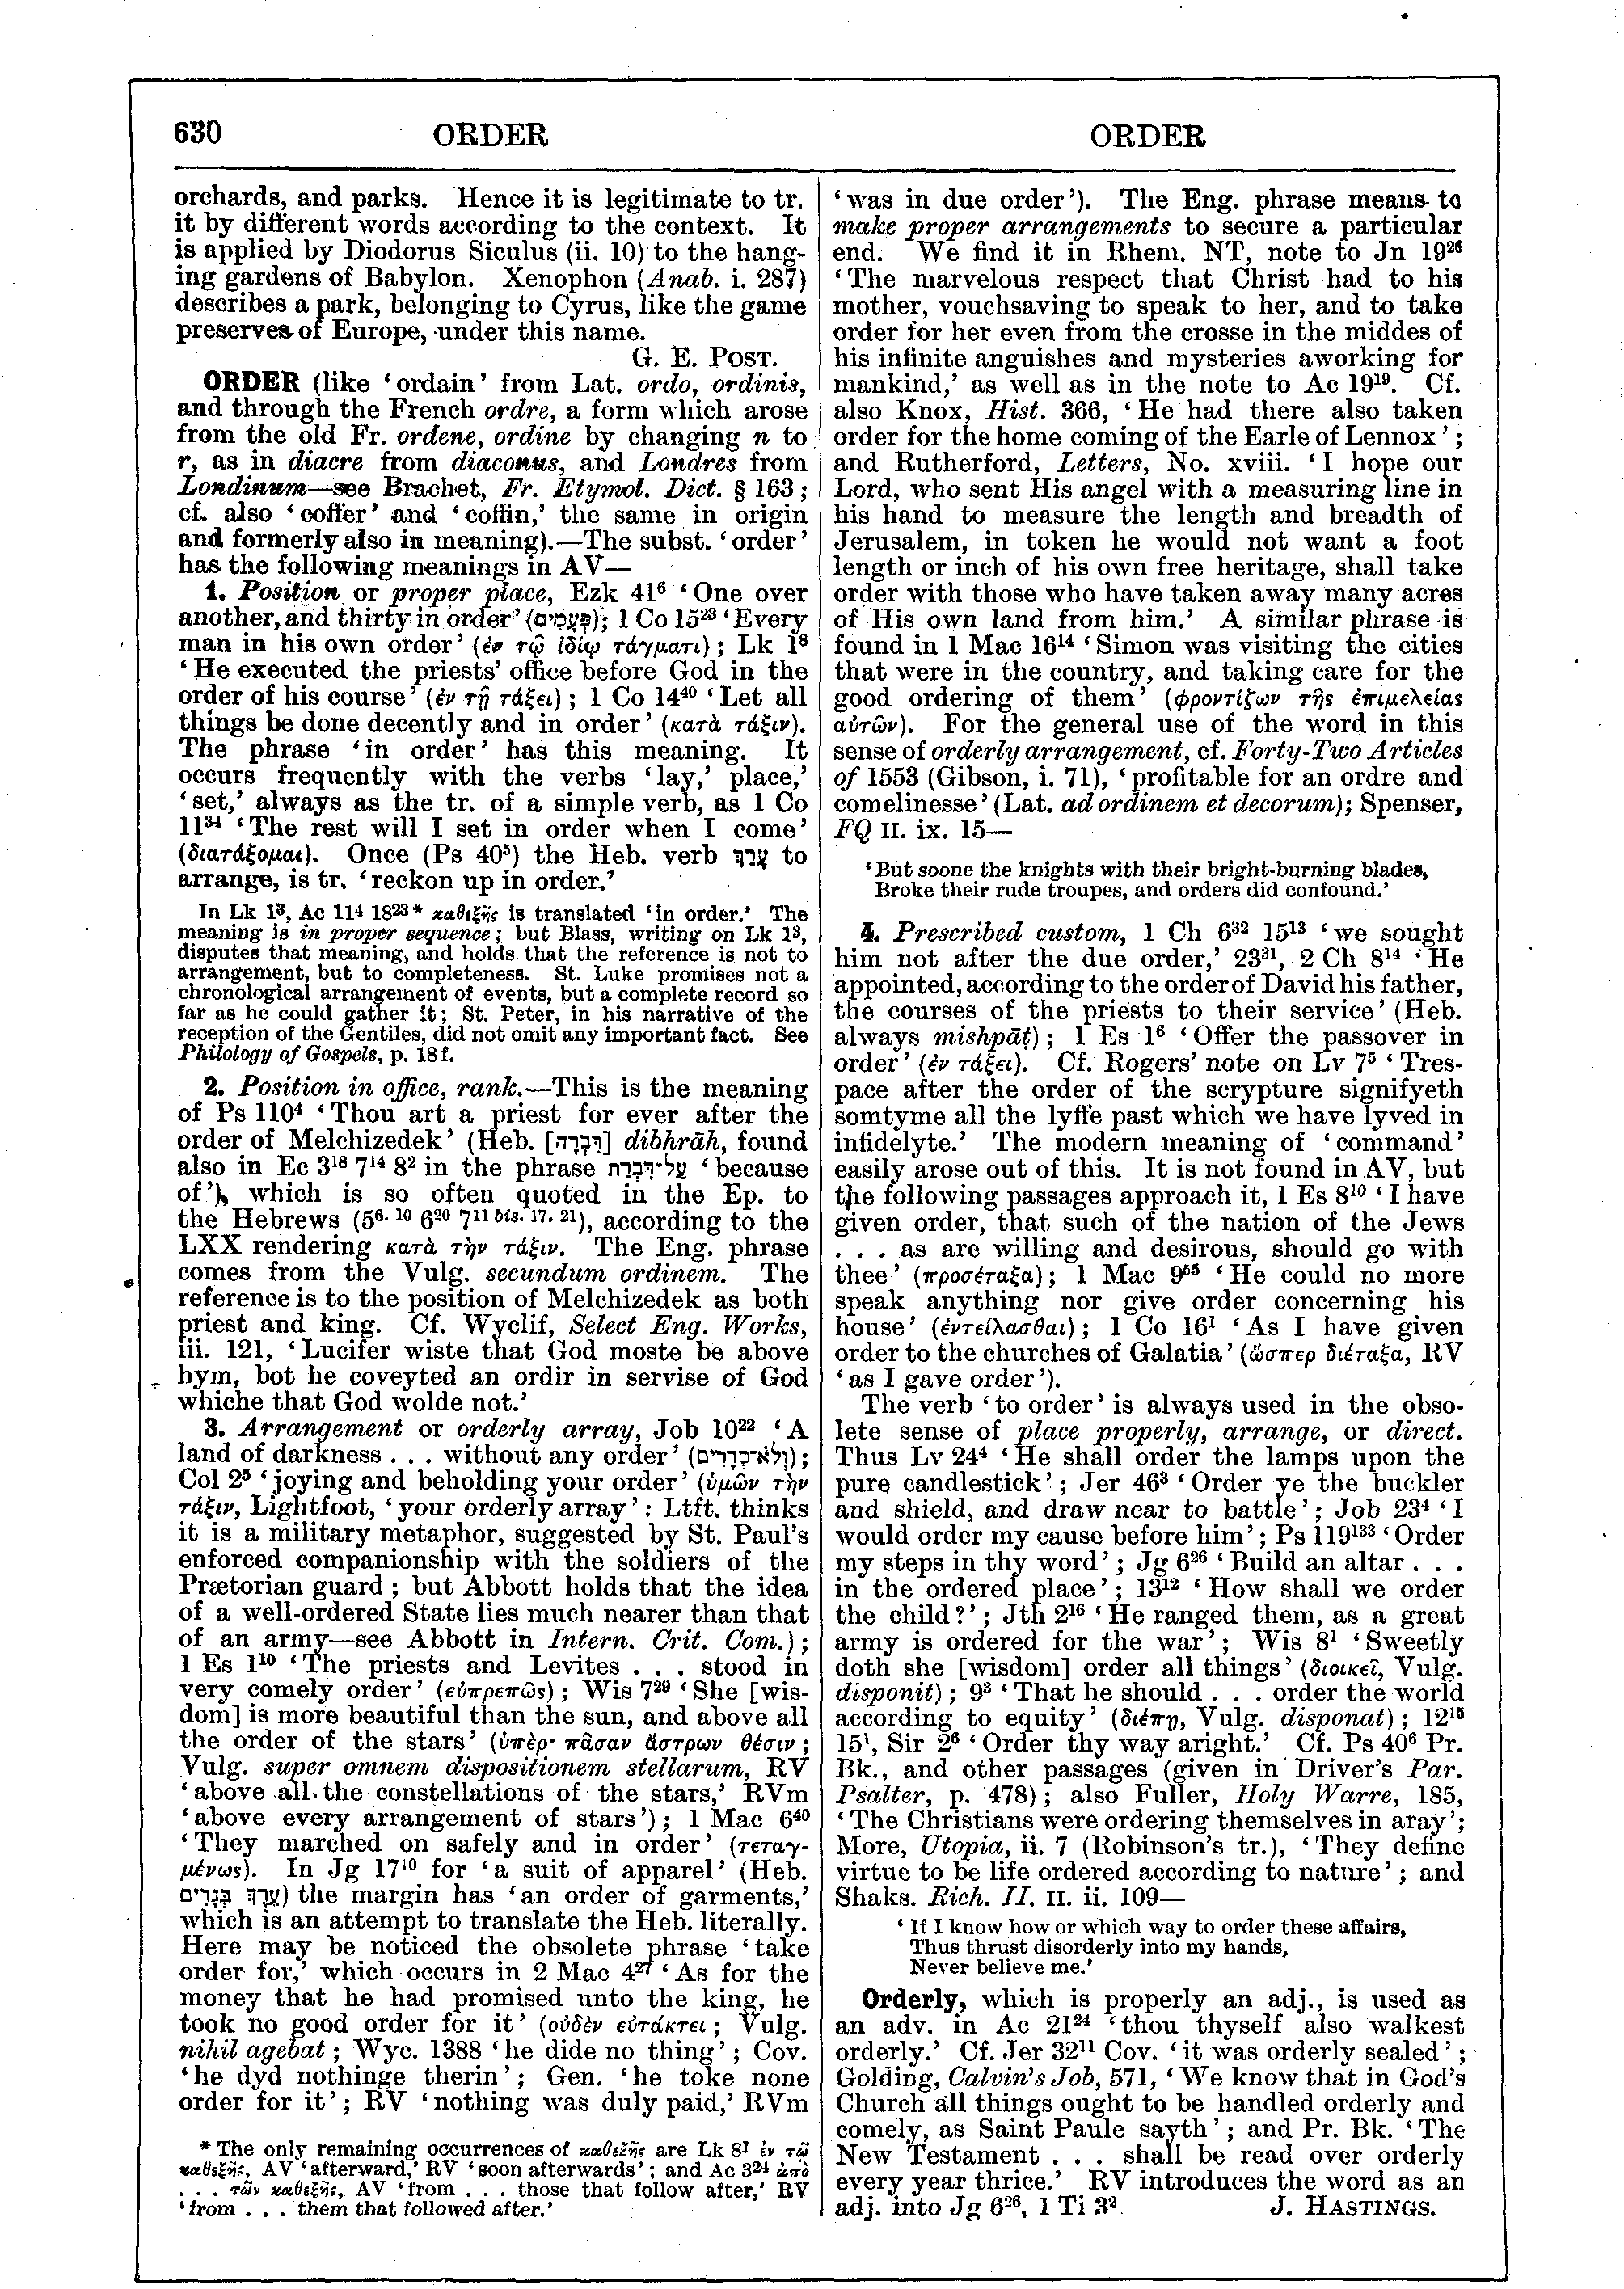 Image of page 630